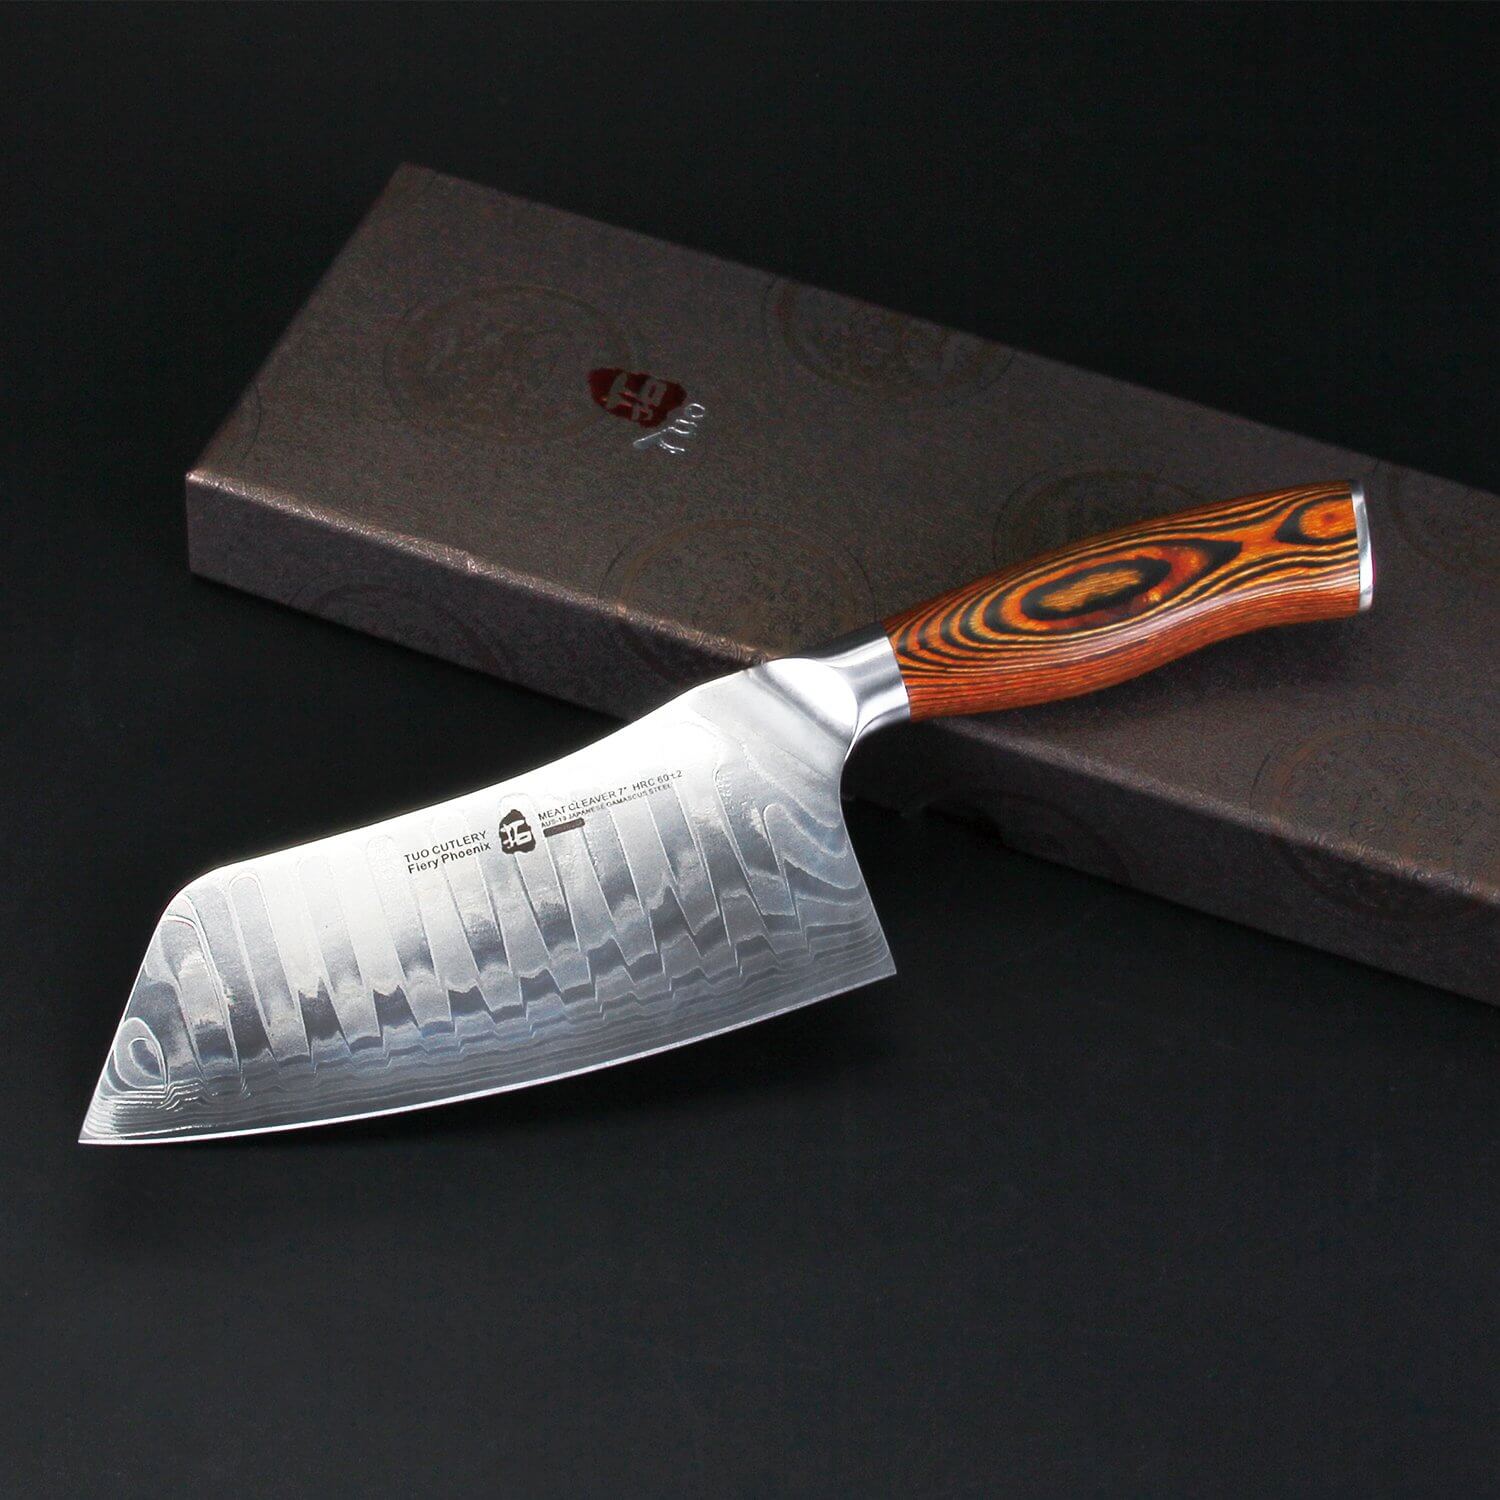 TUO Cutlery Cleaver Knife - Japanese AUS-10 Damascus steel, best japanese knives, best quality knives, Best Japanese chef knives